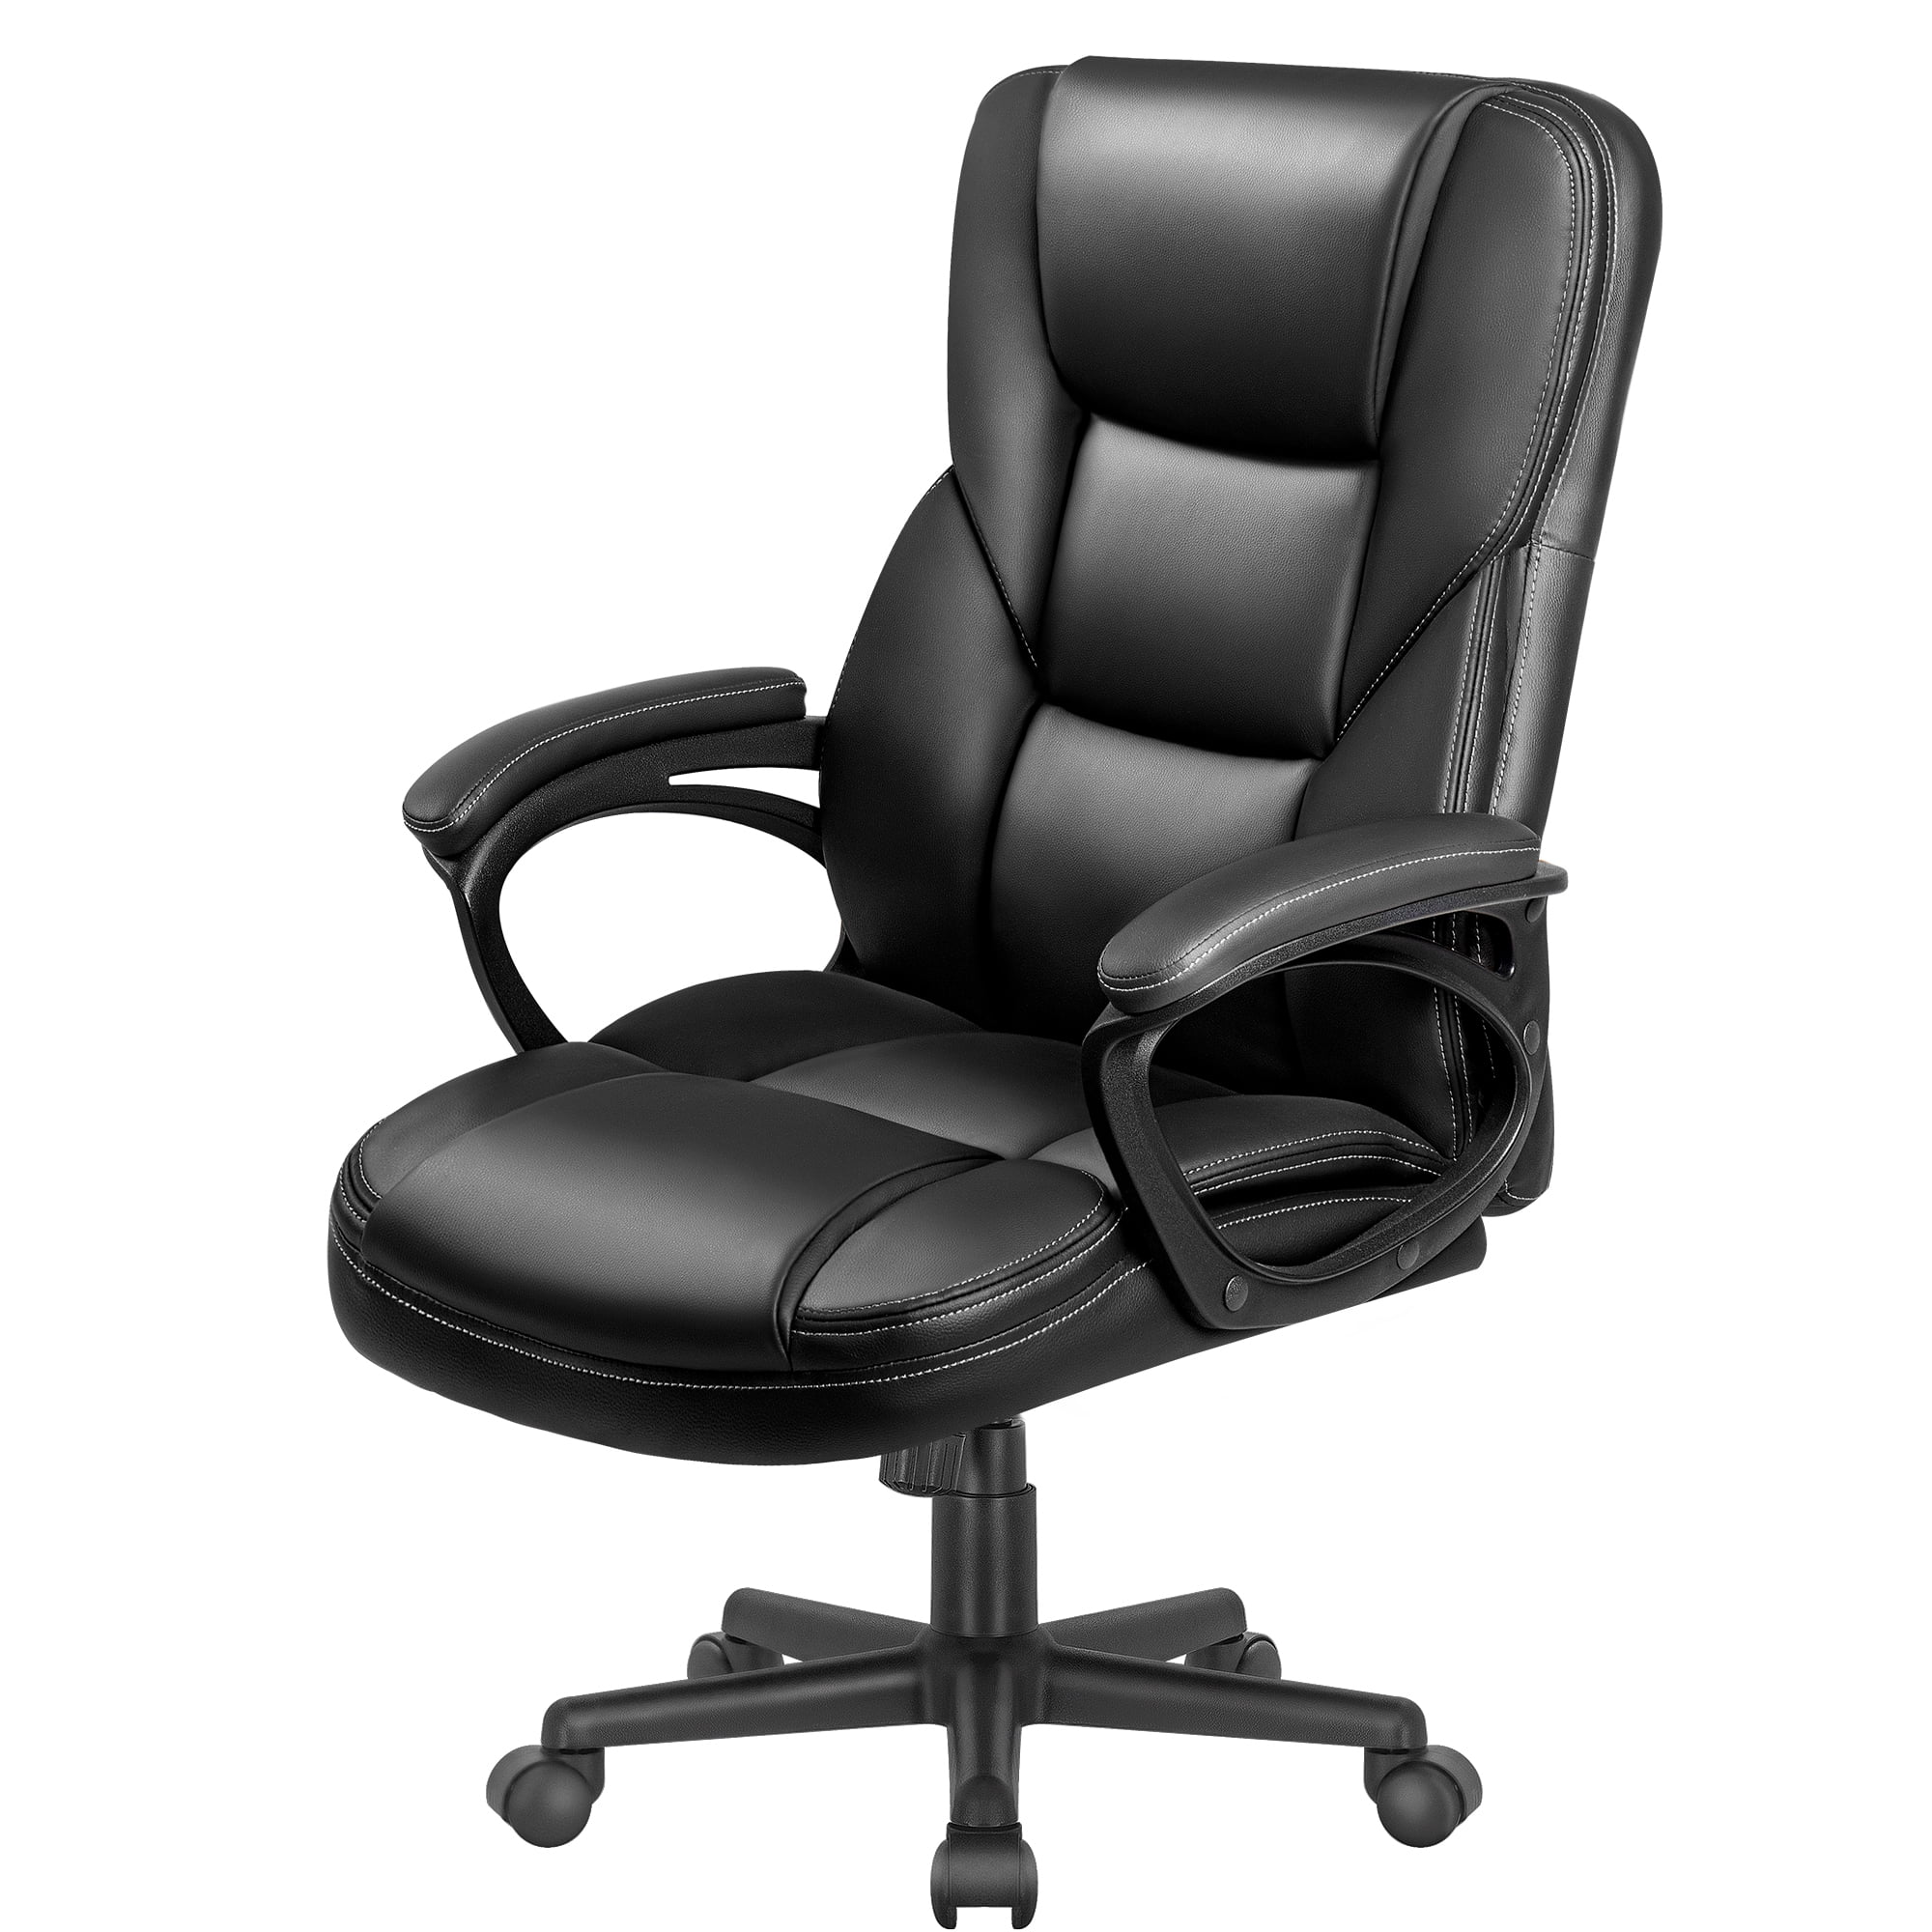 Furmax Manager's Chair with Swivel & Lumbar Support, 265 lb. Capacity, Black